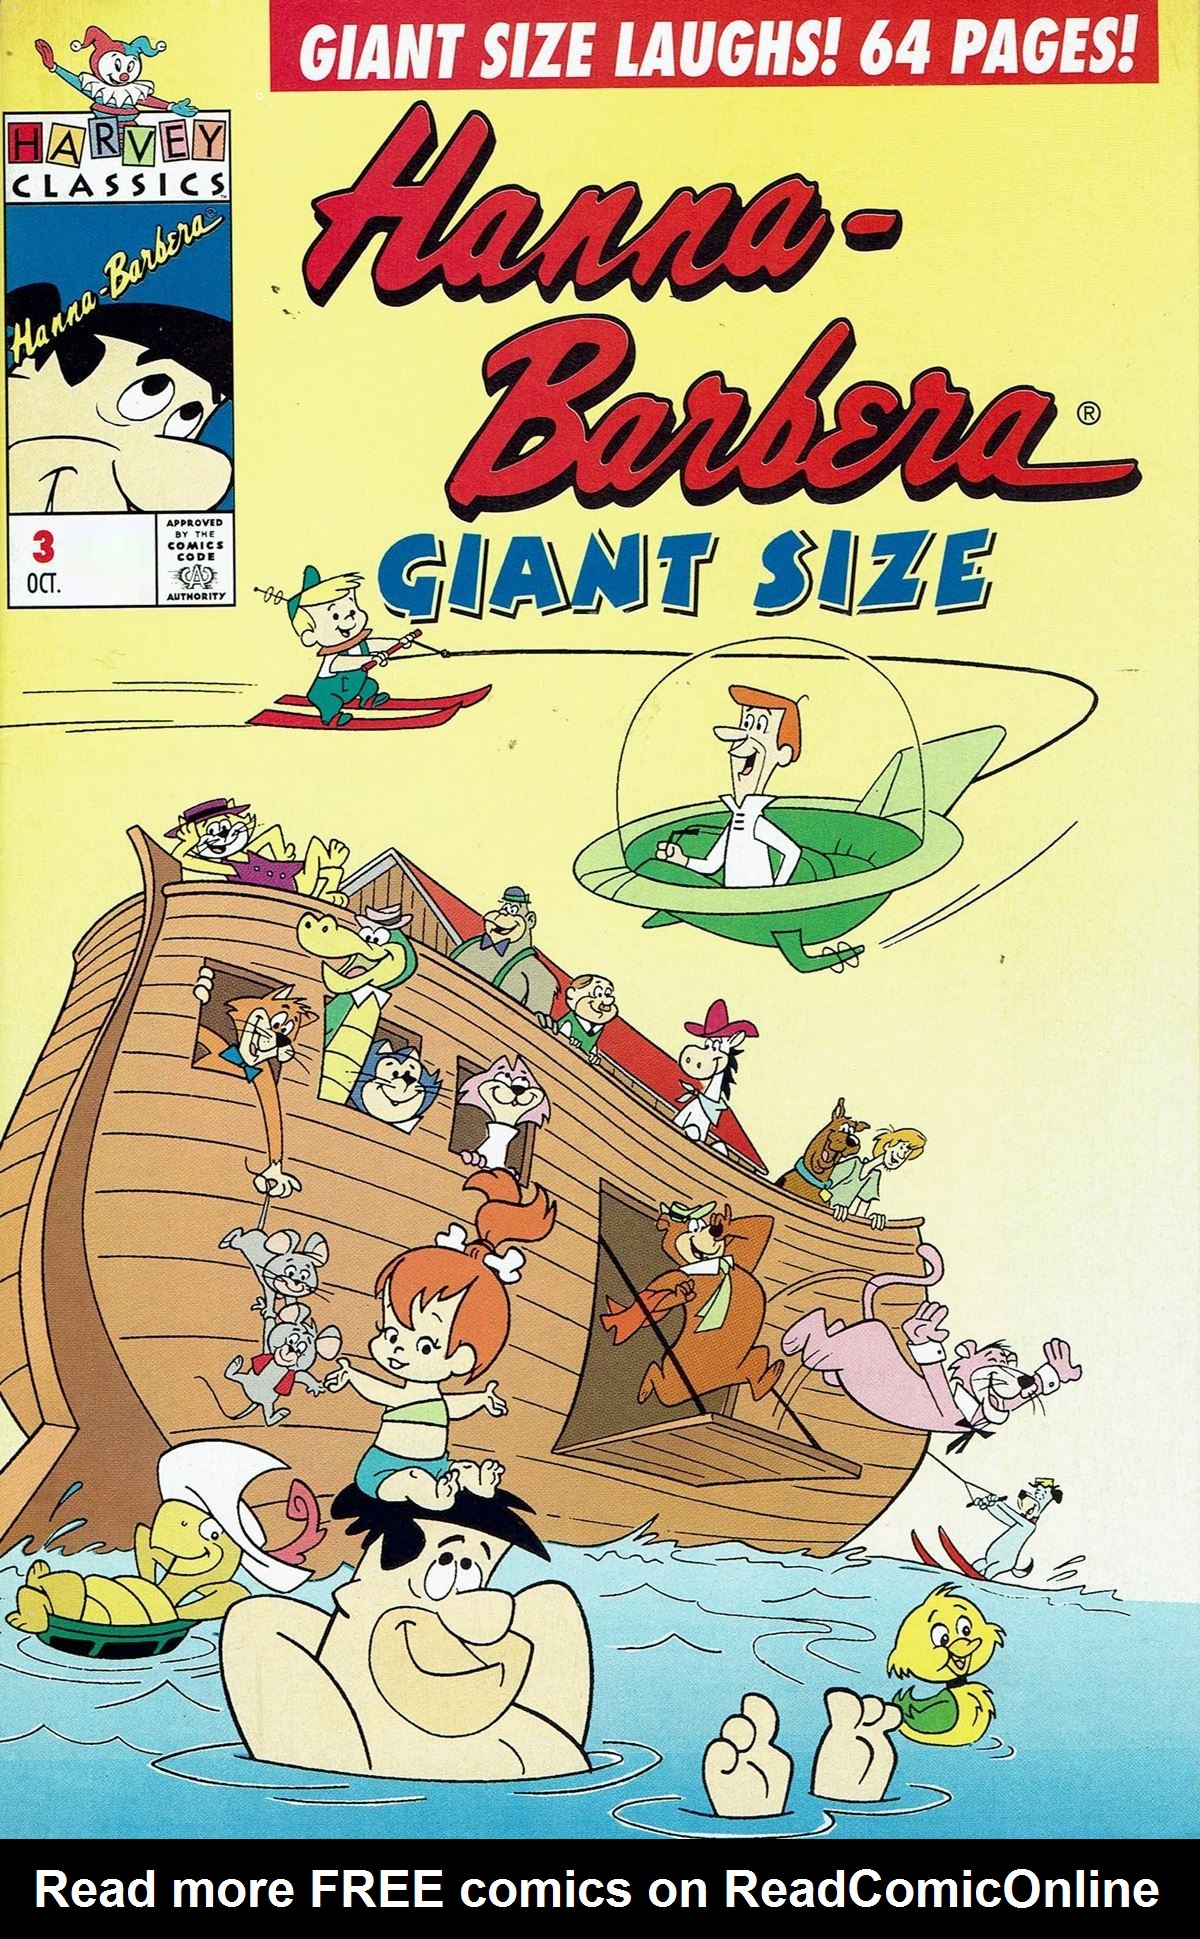 Read online Hanna Barbera Giant Size comic -  Issue #3 - 30